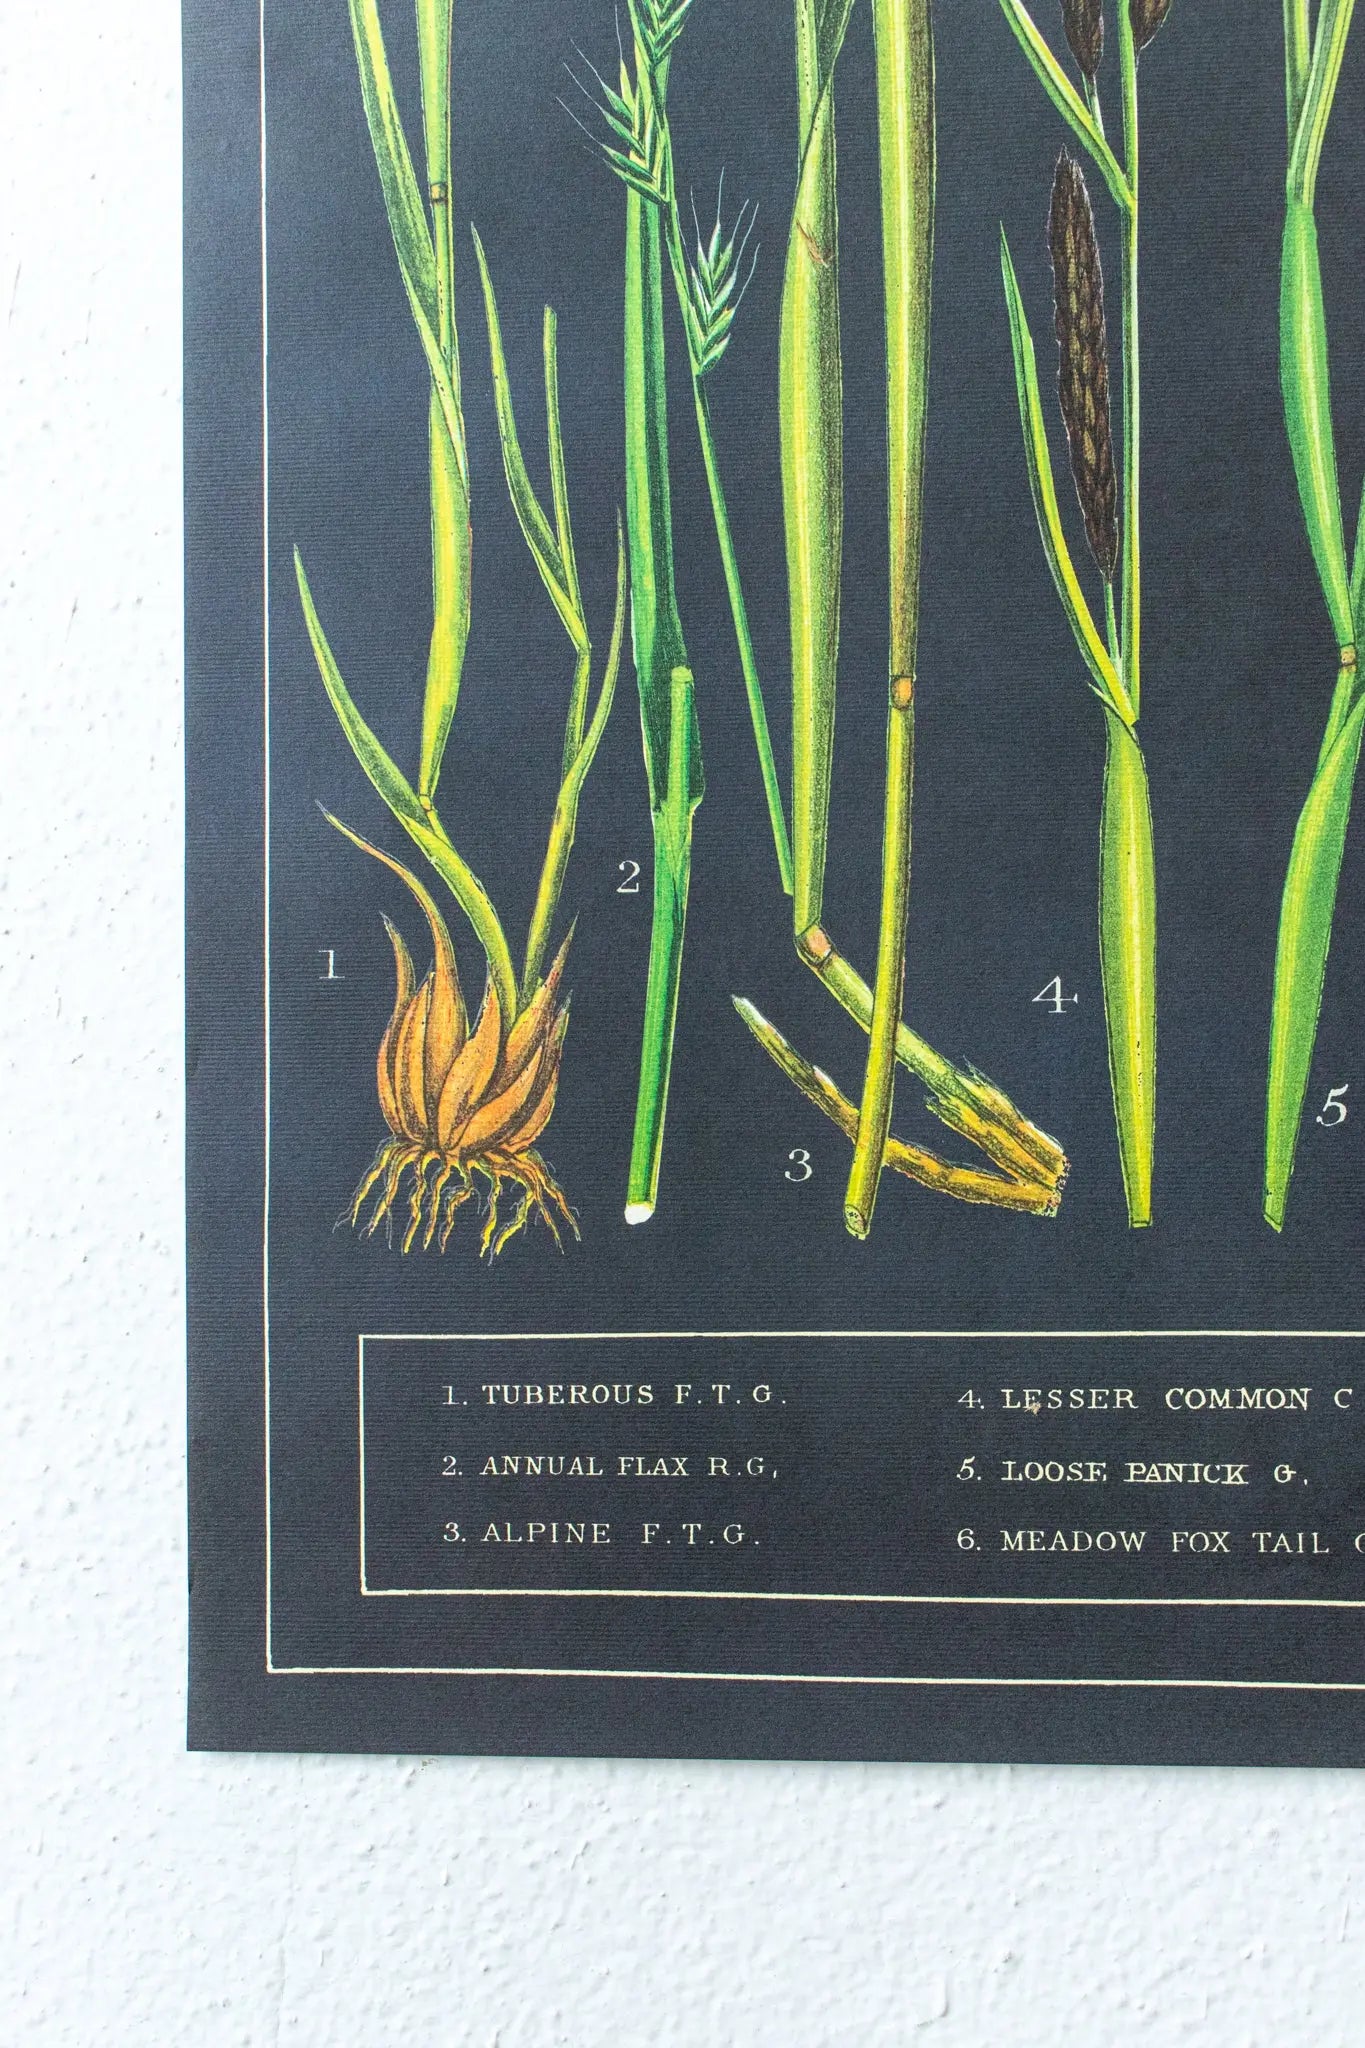 British Grass and Sedges Scientific Chart - Stemcell Science Shop